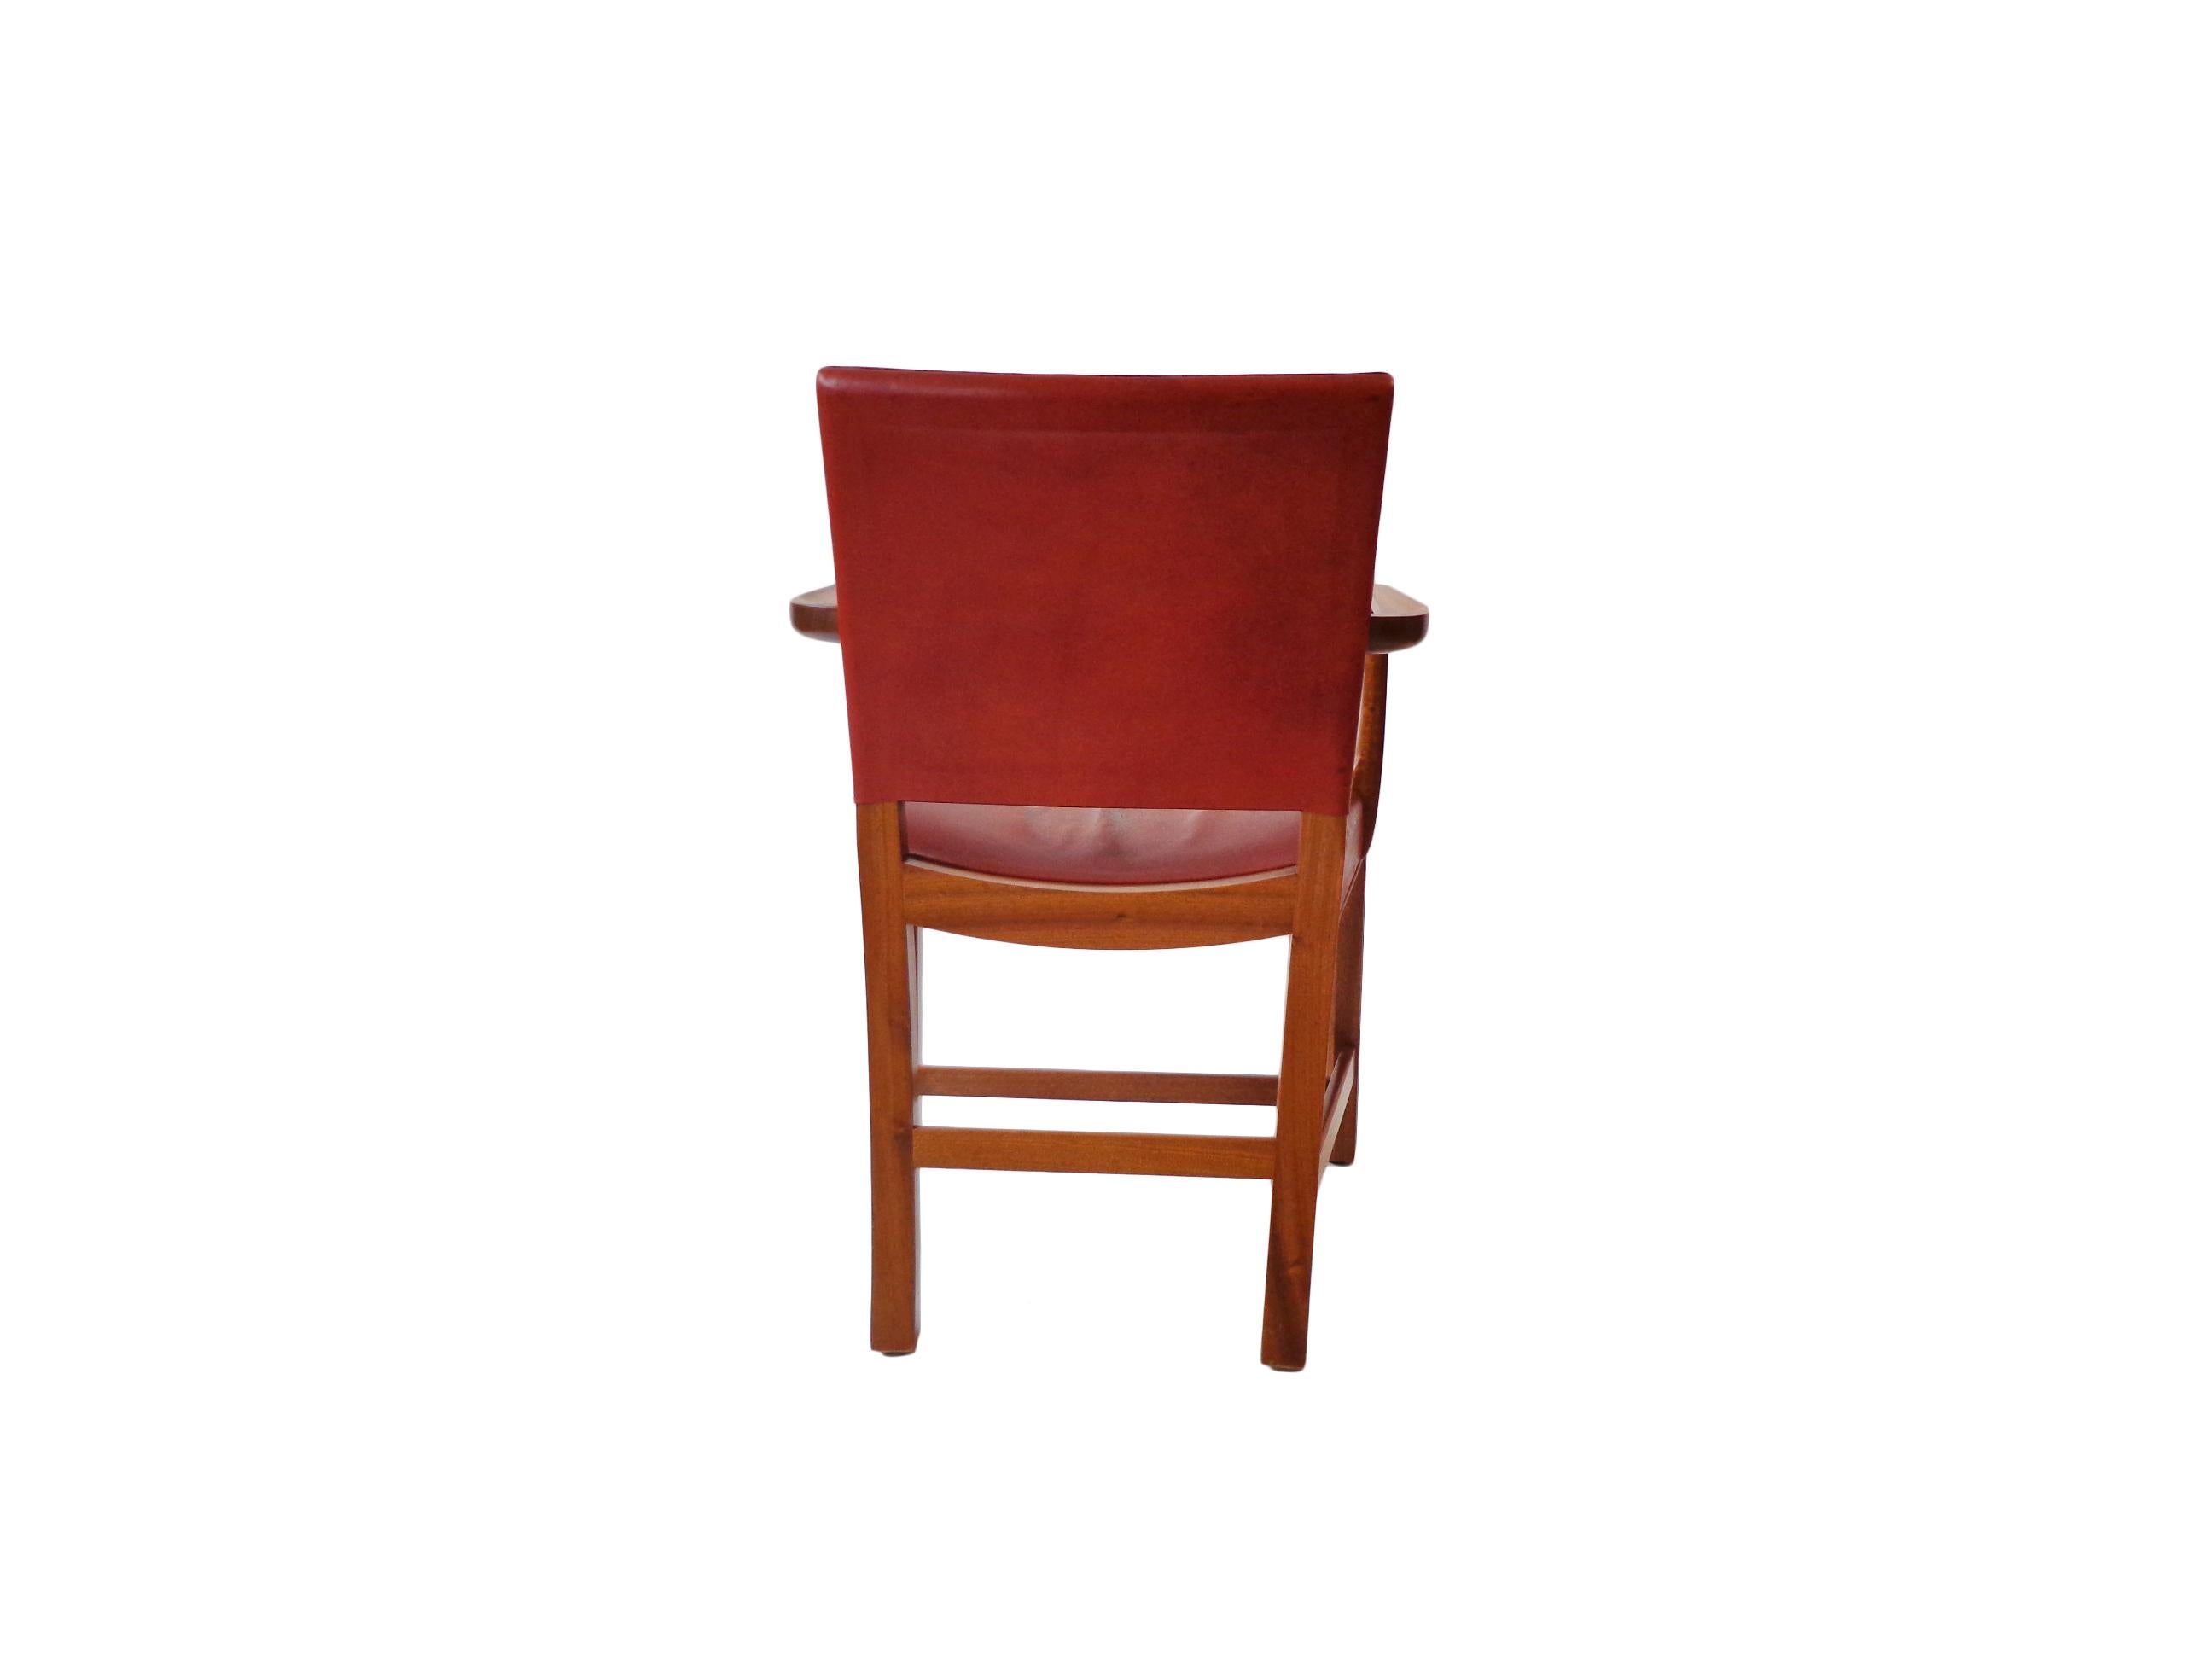 Scandinavian Modern Kaare Klint Armchair in indian red leather and mahogany by Rud Rasmussens, 1940s For Sale